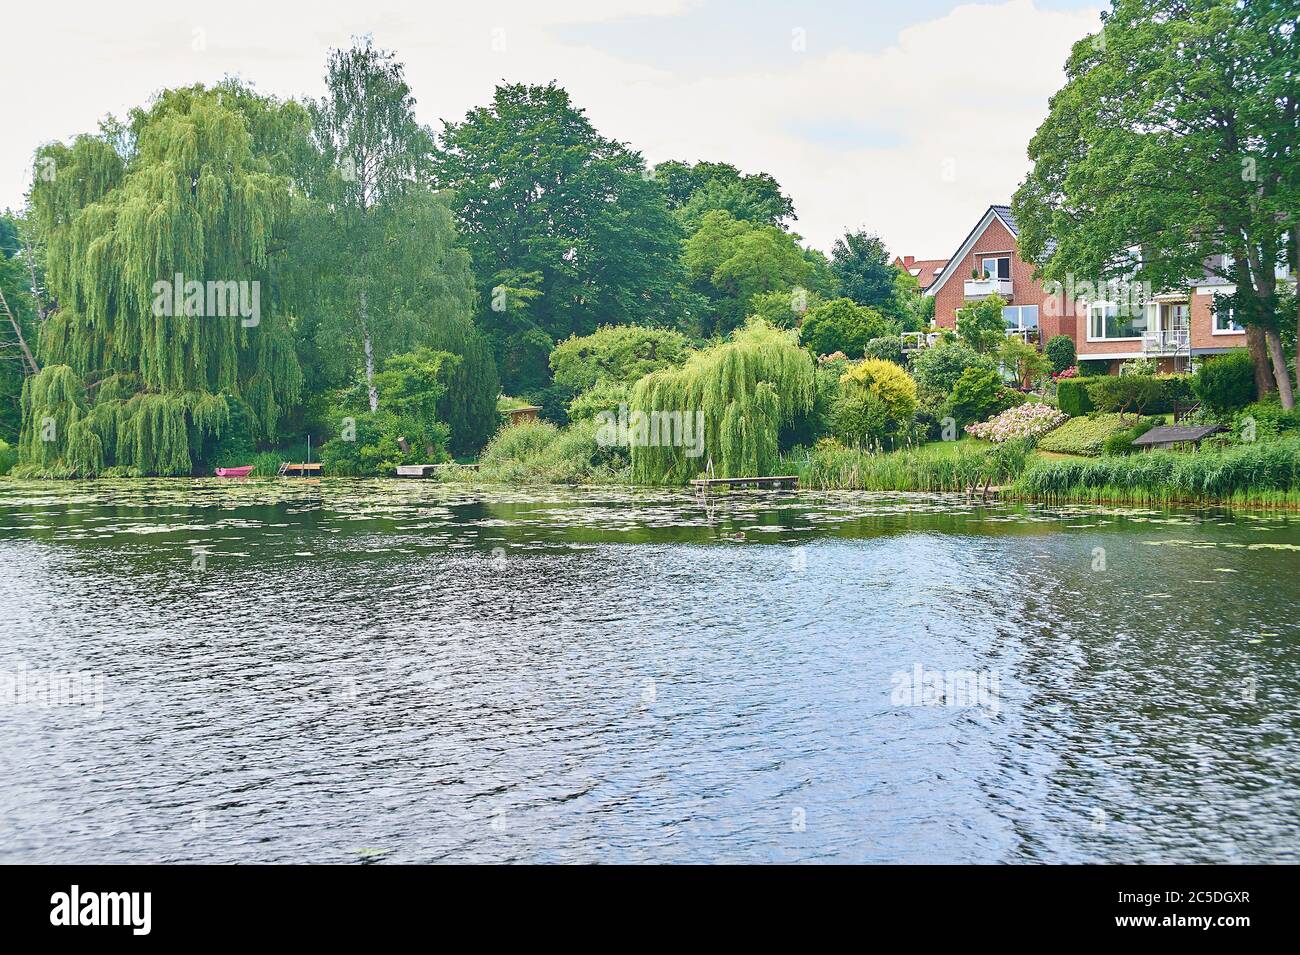 The Wakenitz river meanders through a suburb of Lübeck, passing mansions, villas and manors, Northern Germany Stock Photo